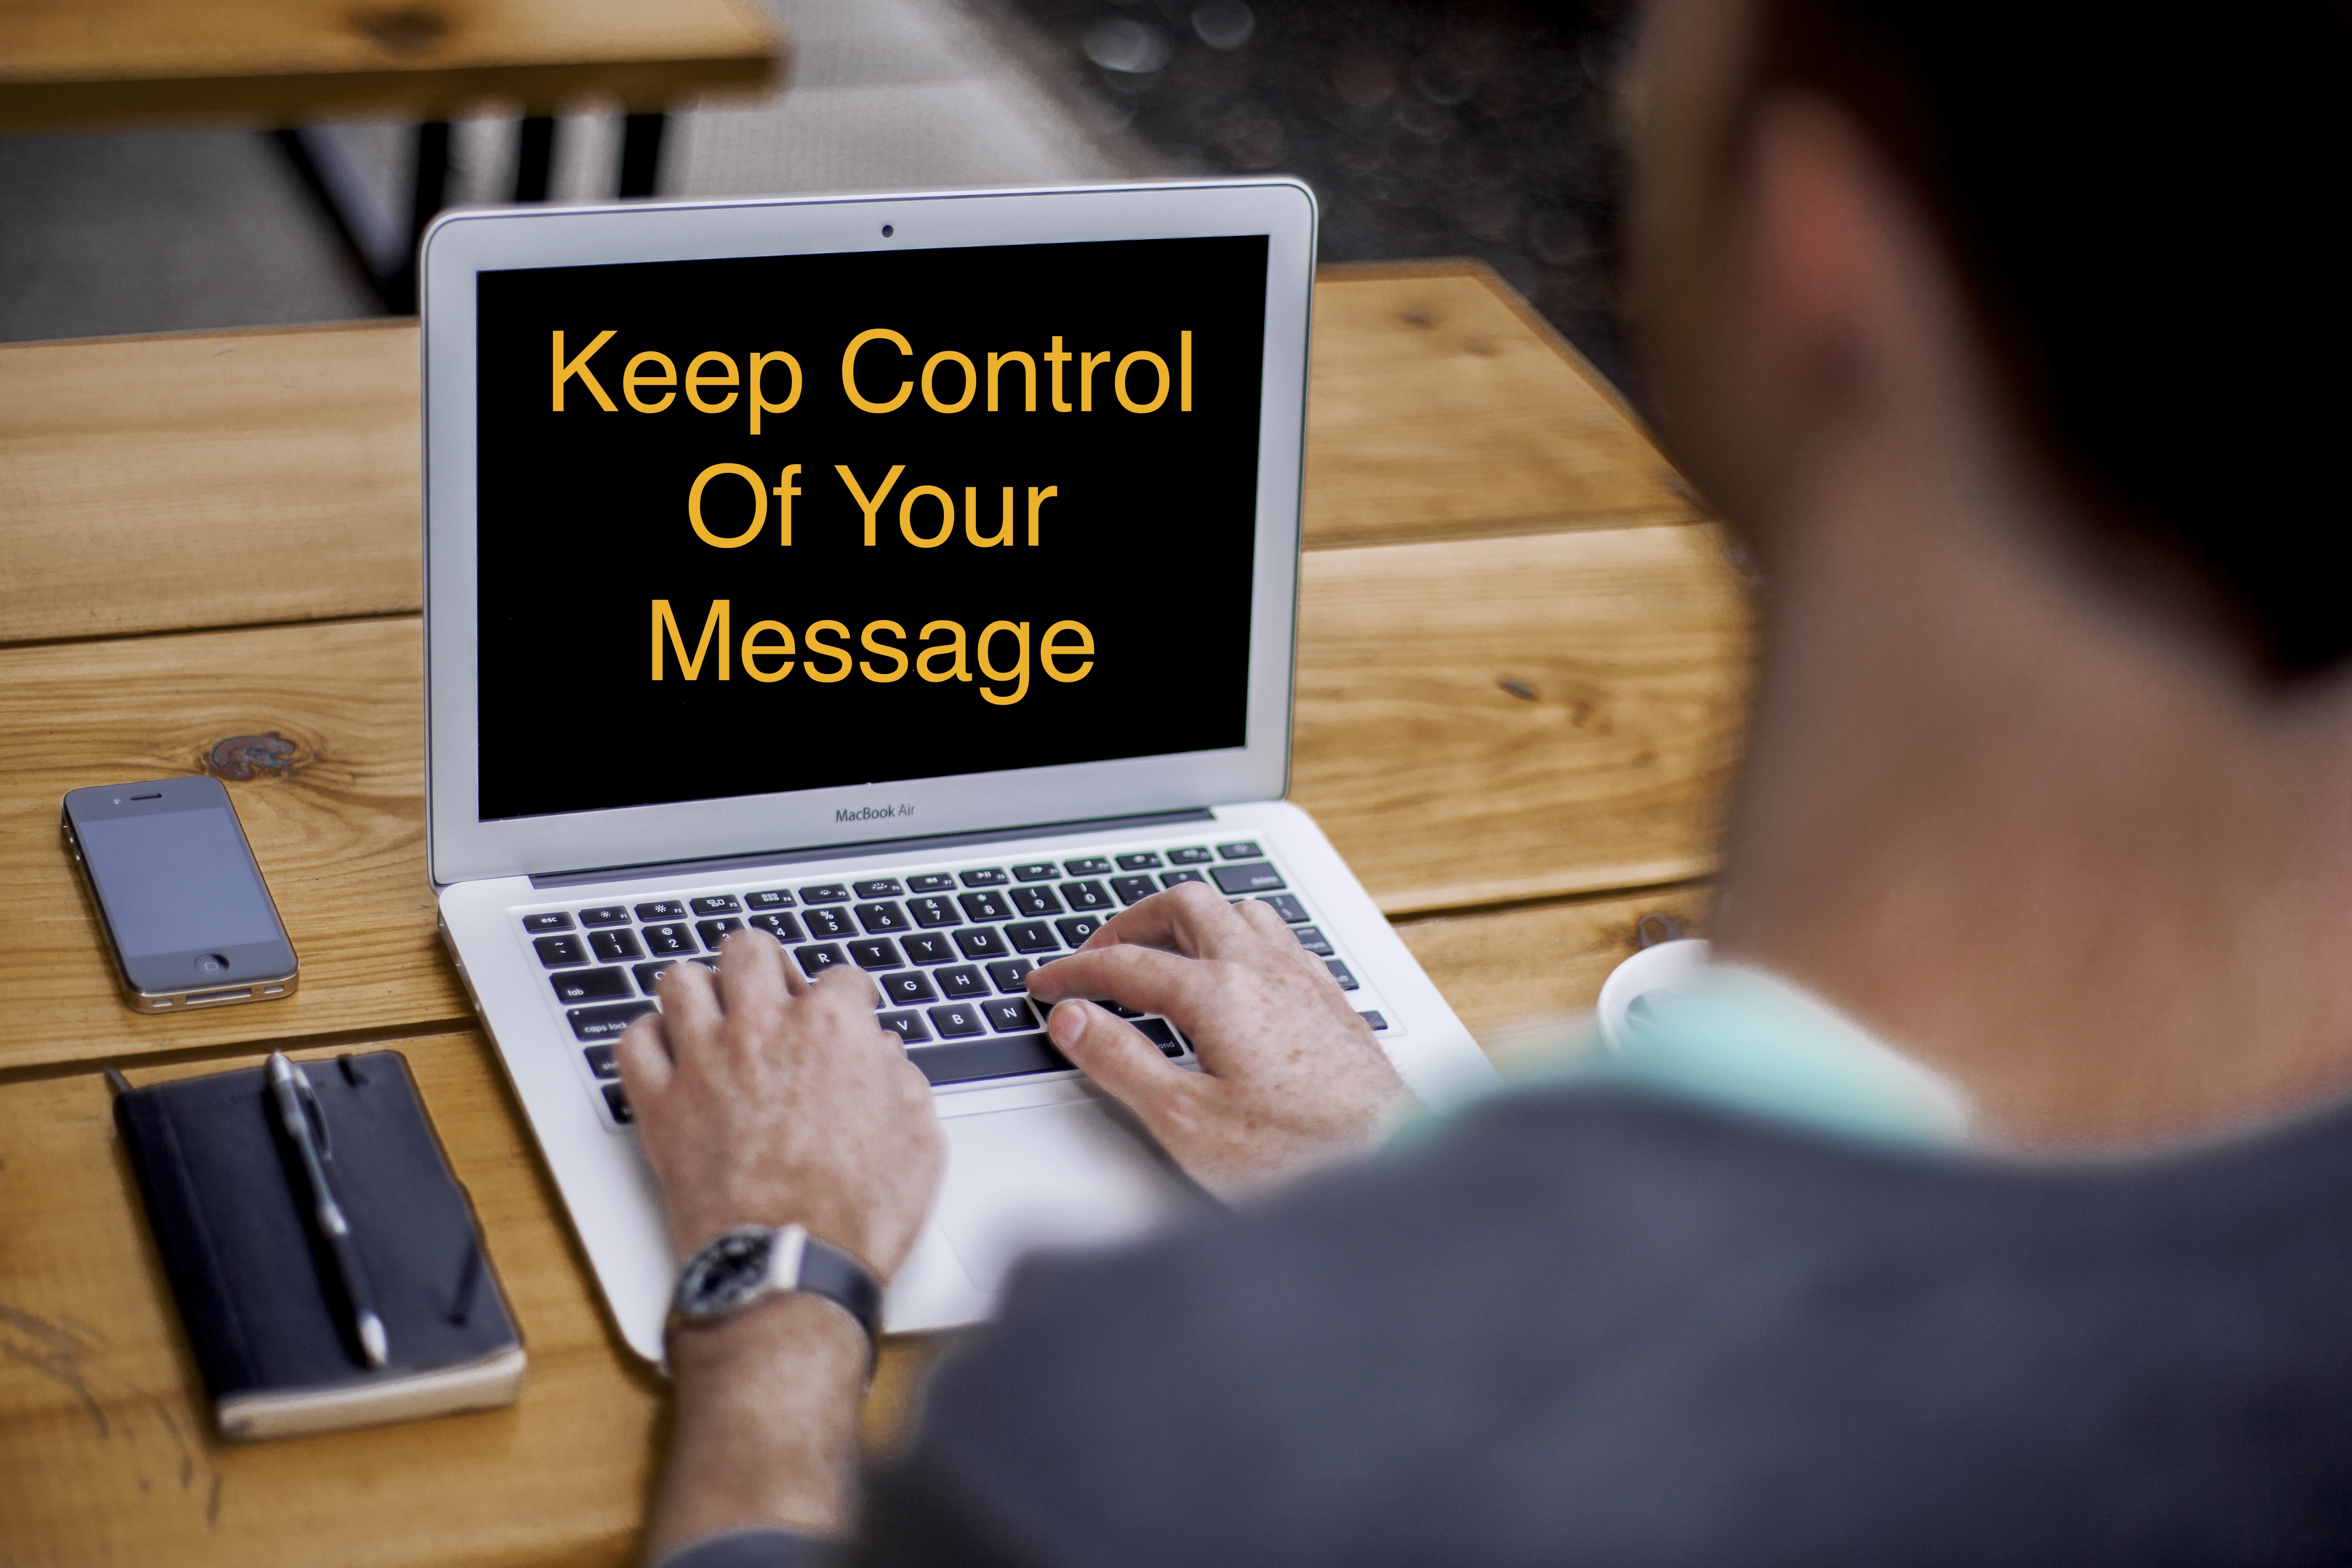 Keep control of your message